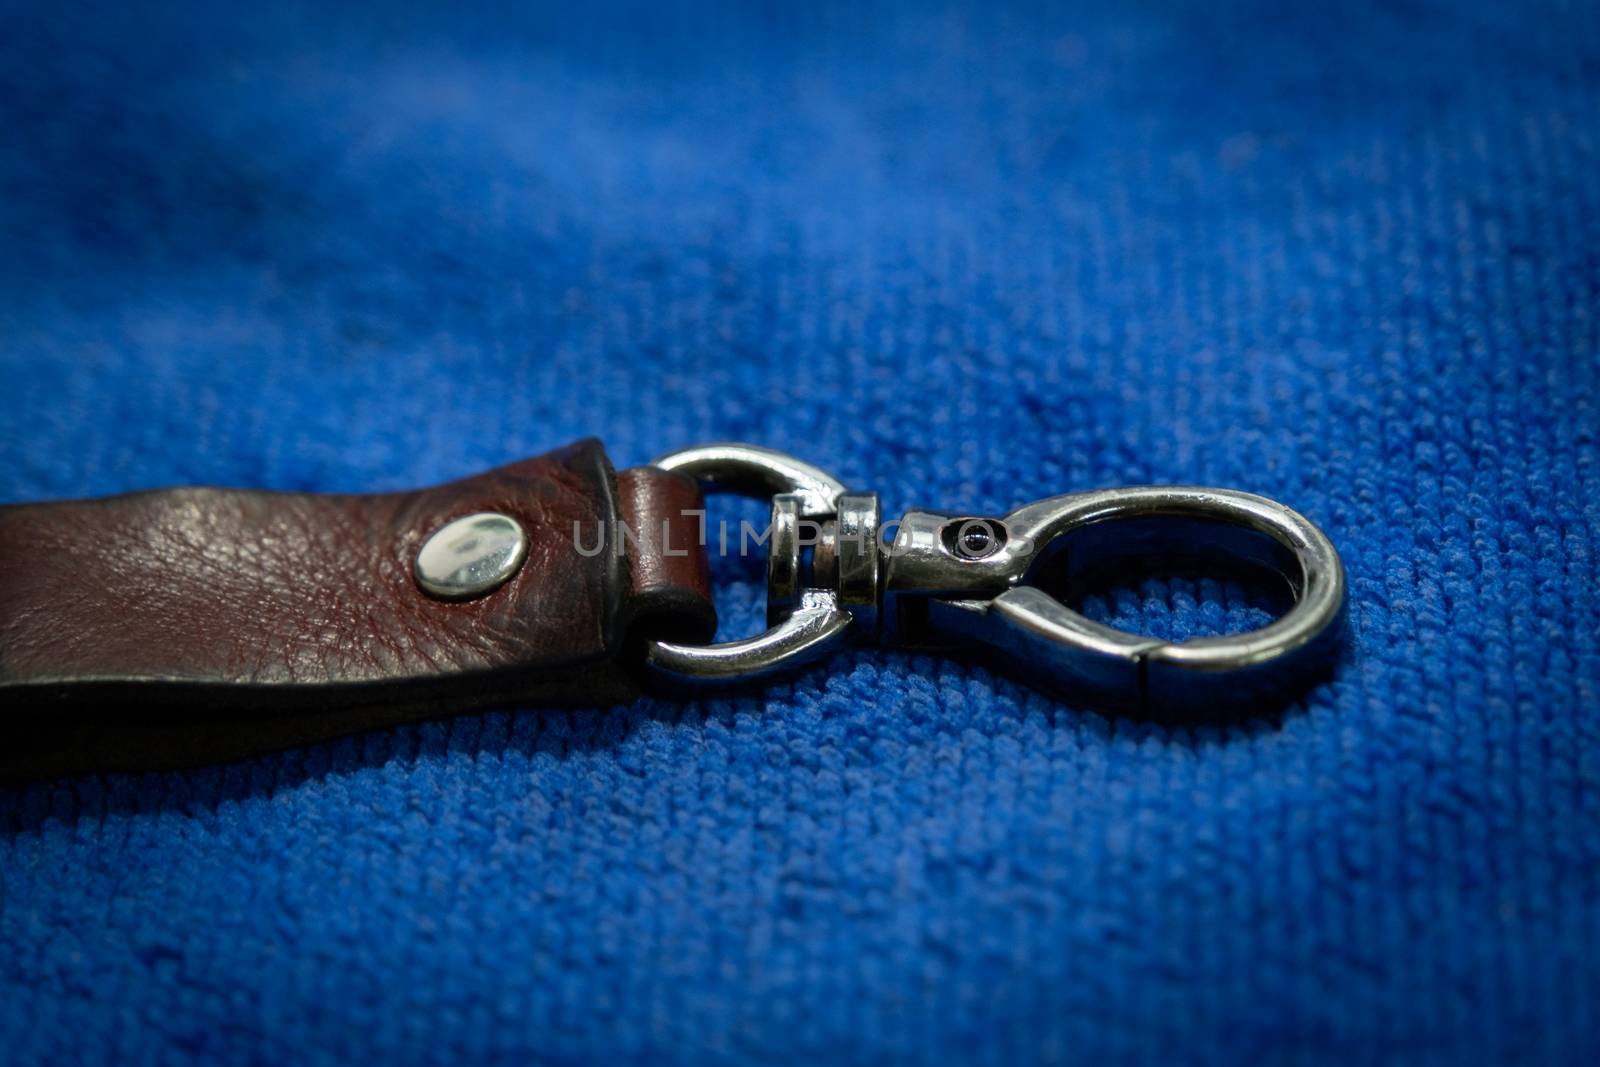 Select focus Leather key chain with box on blue fabric background